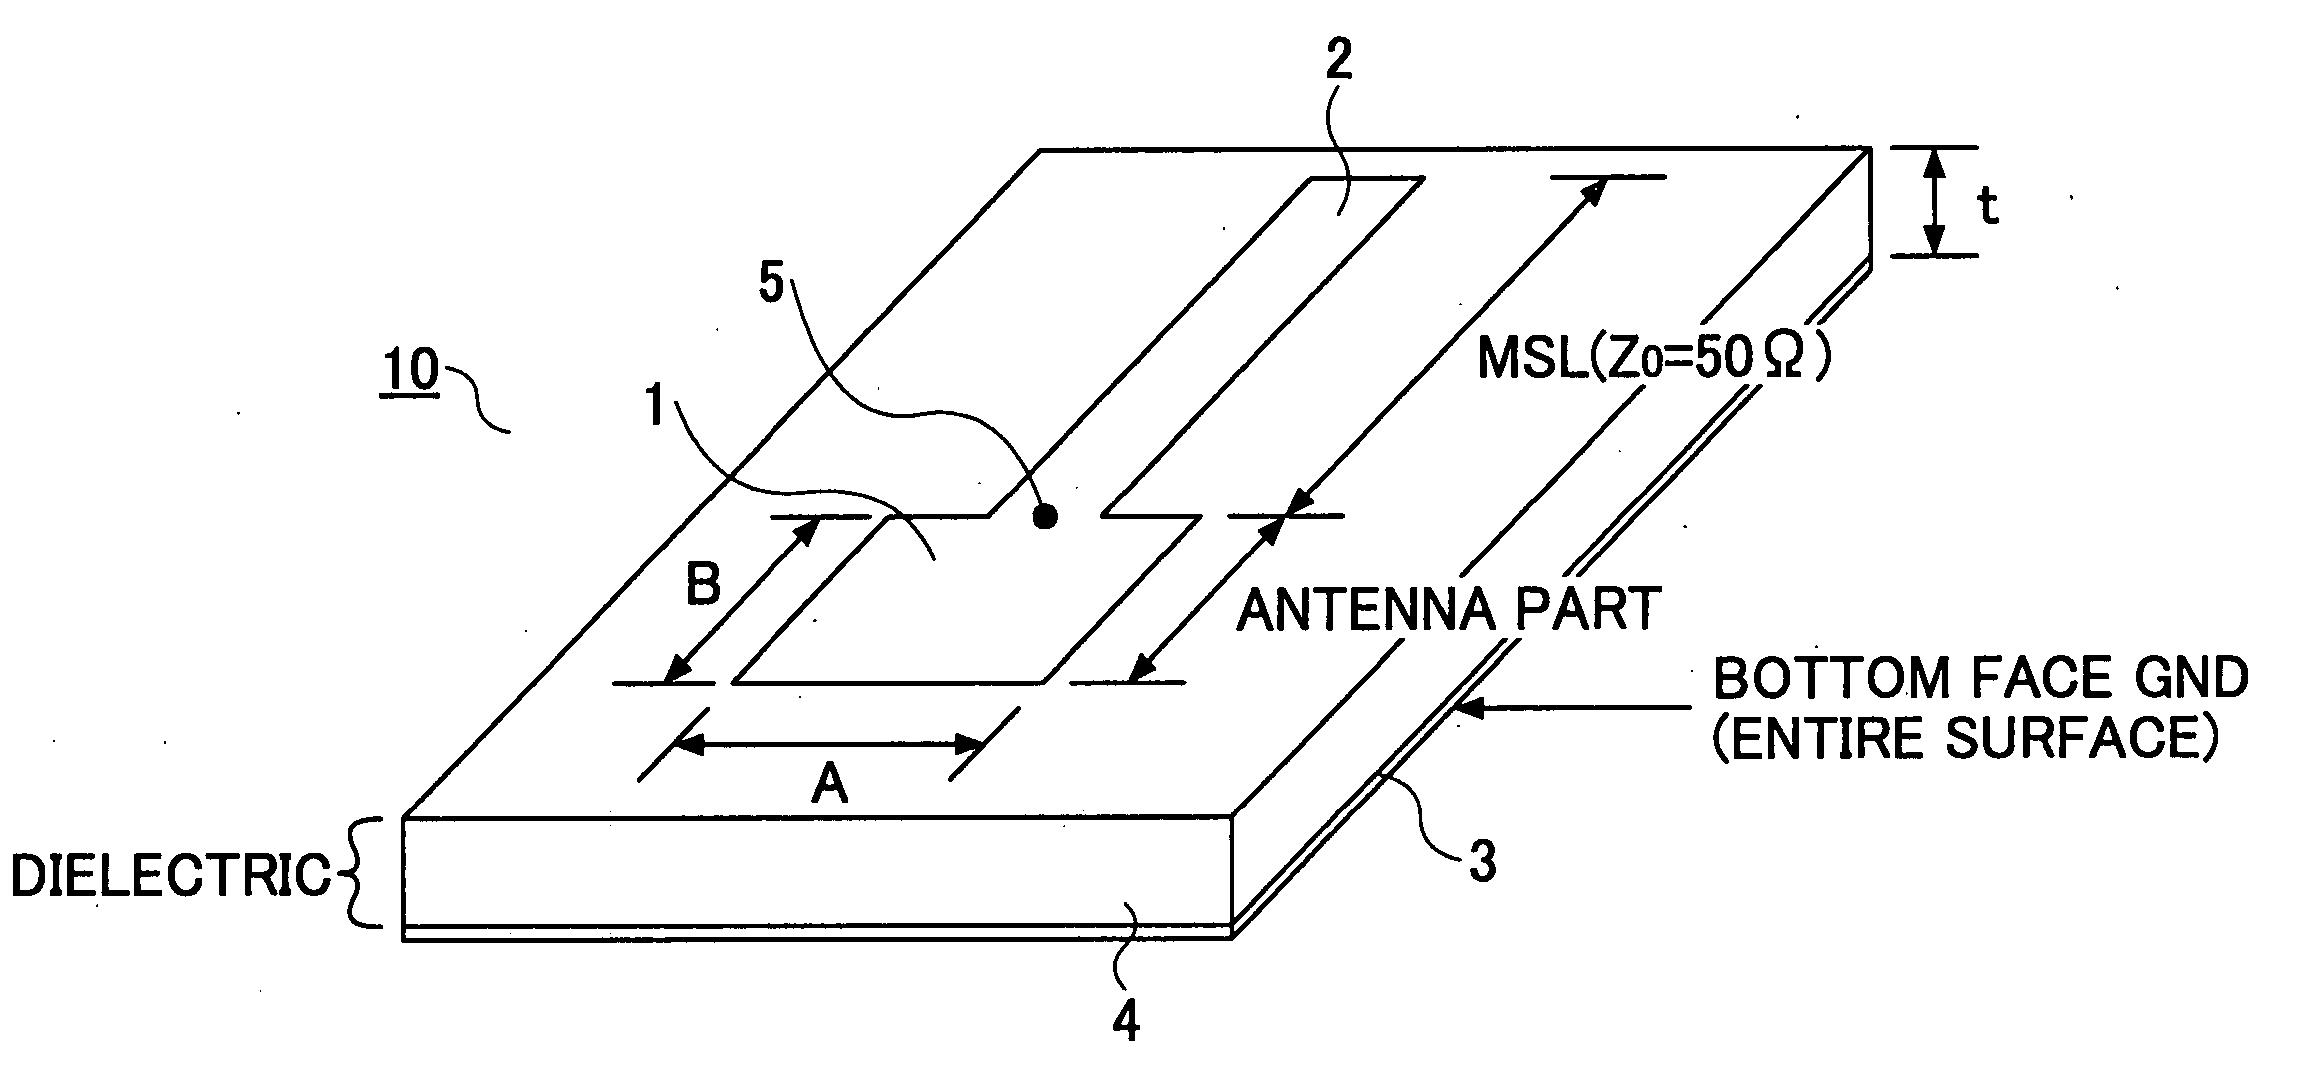 Patch antenna, array antenna, and mounting board having the same